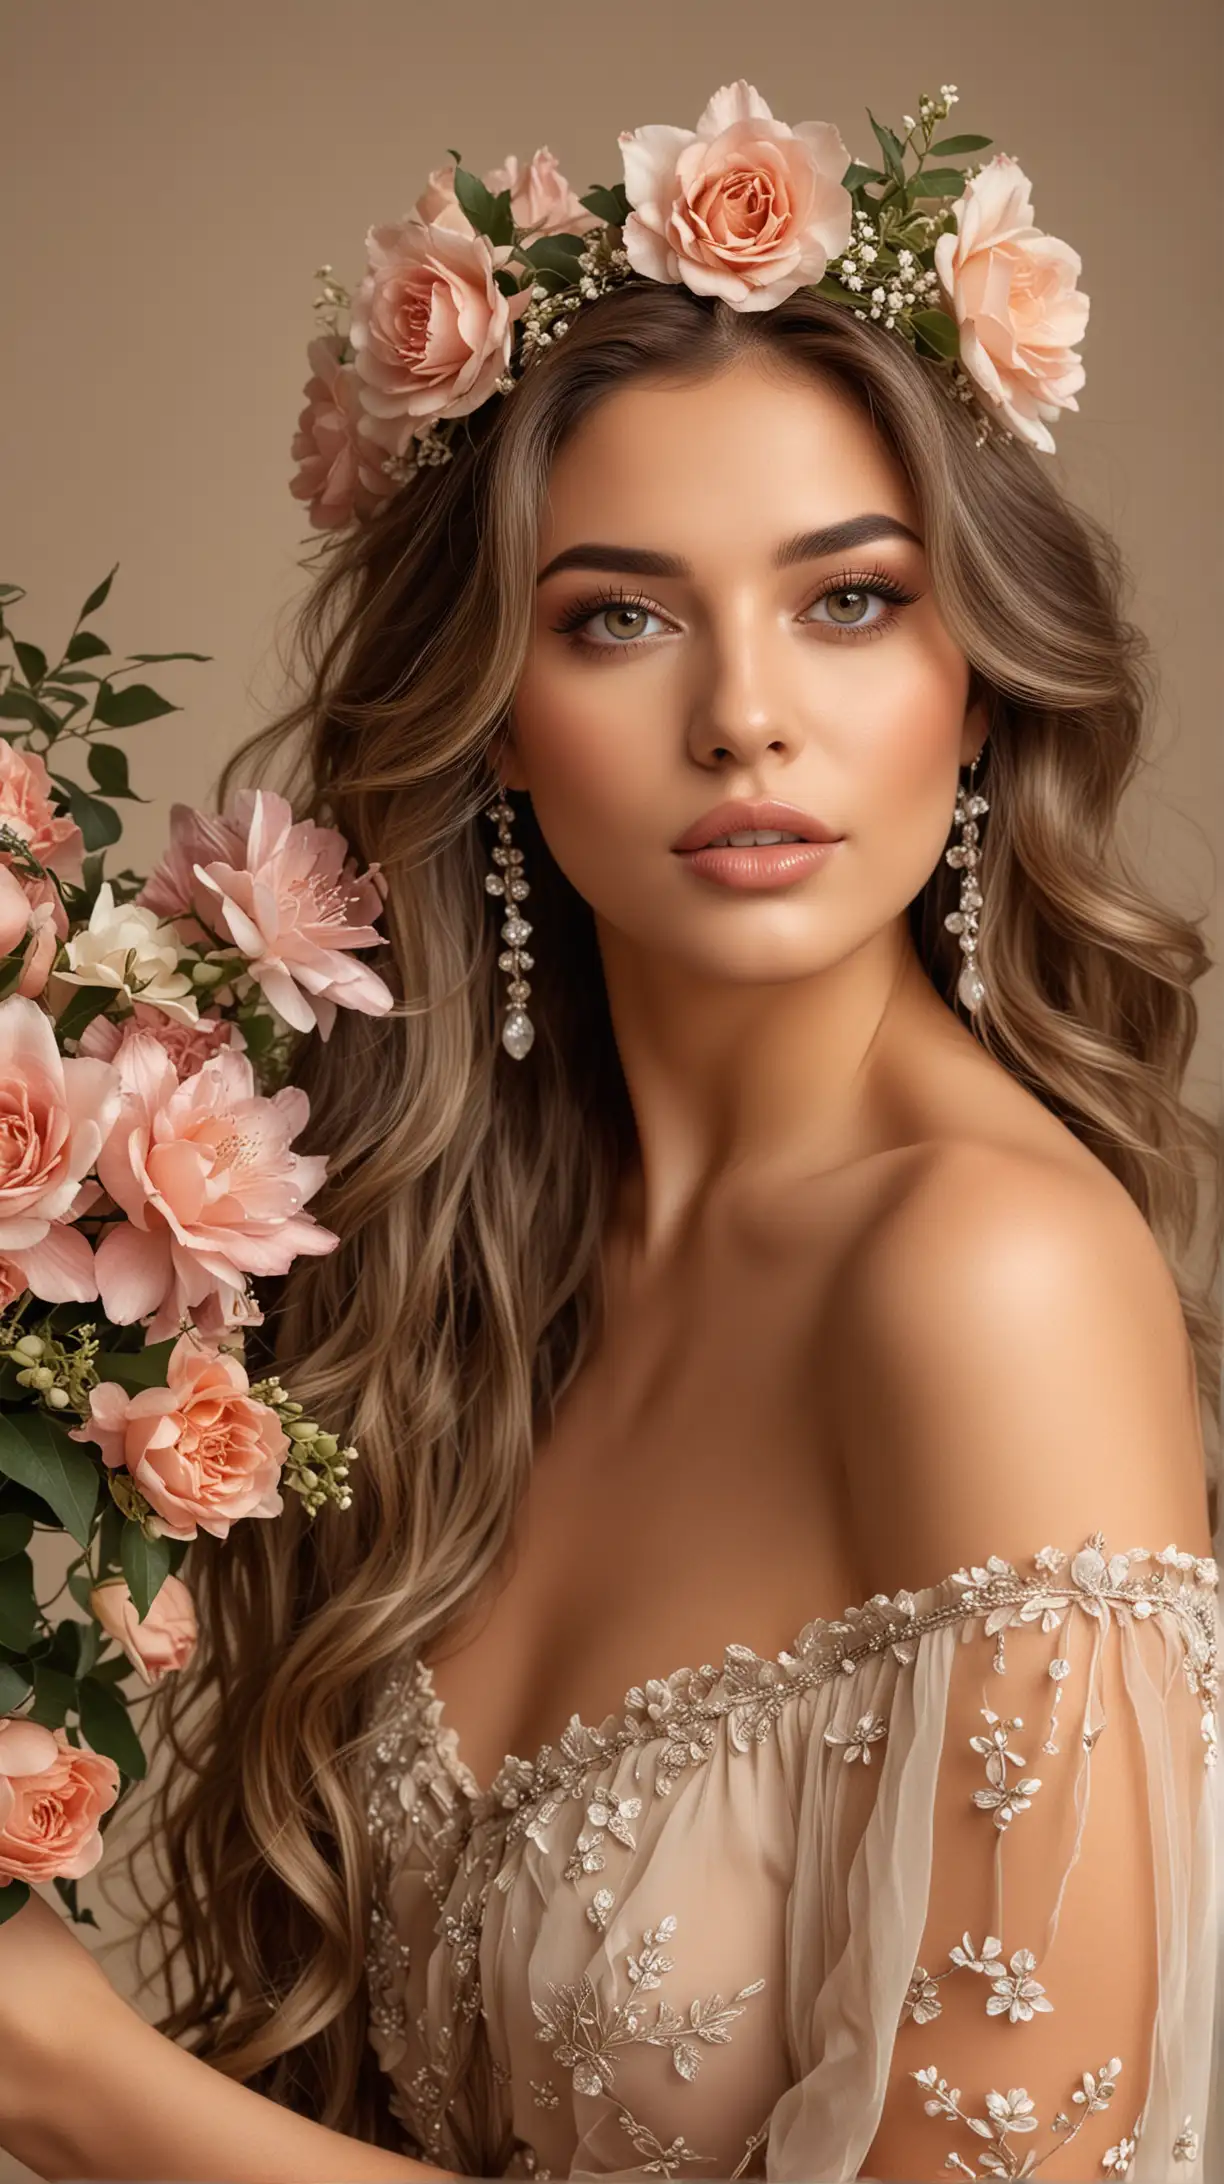 Captivating Woman with Flower Crown and Bouquet in Beige Background